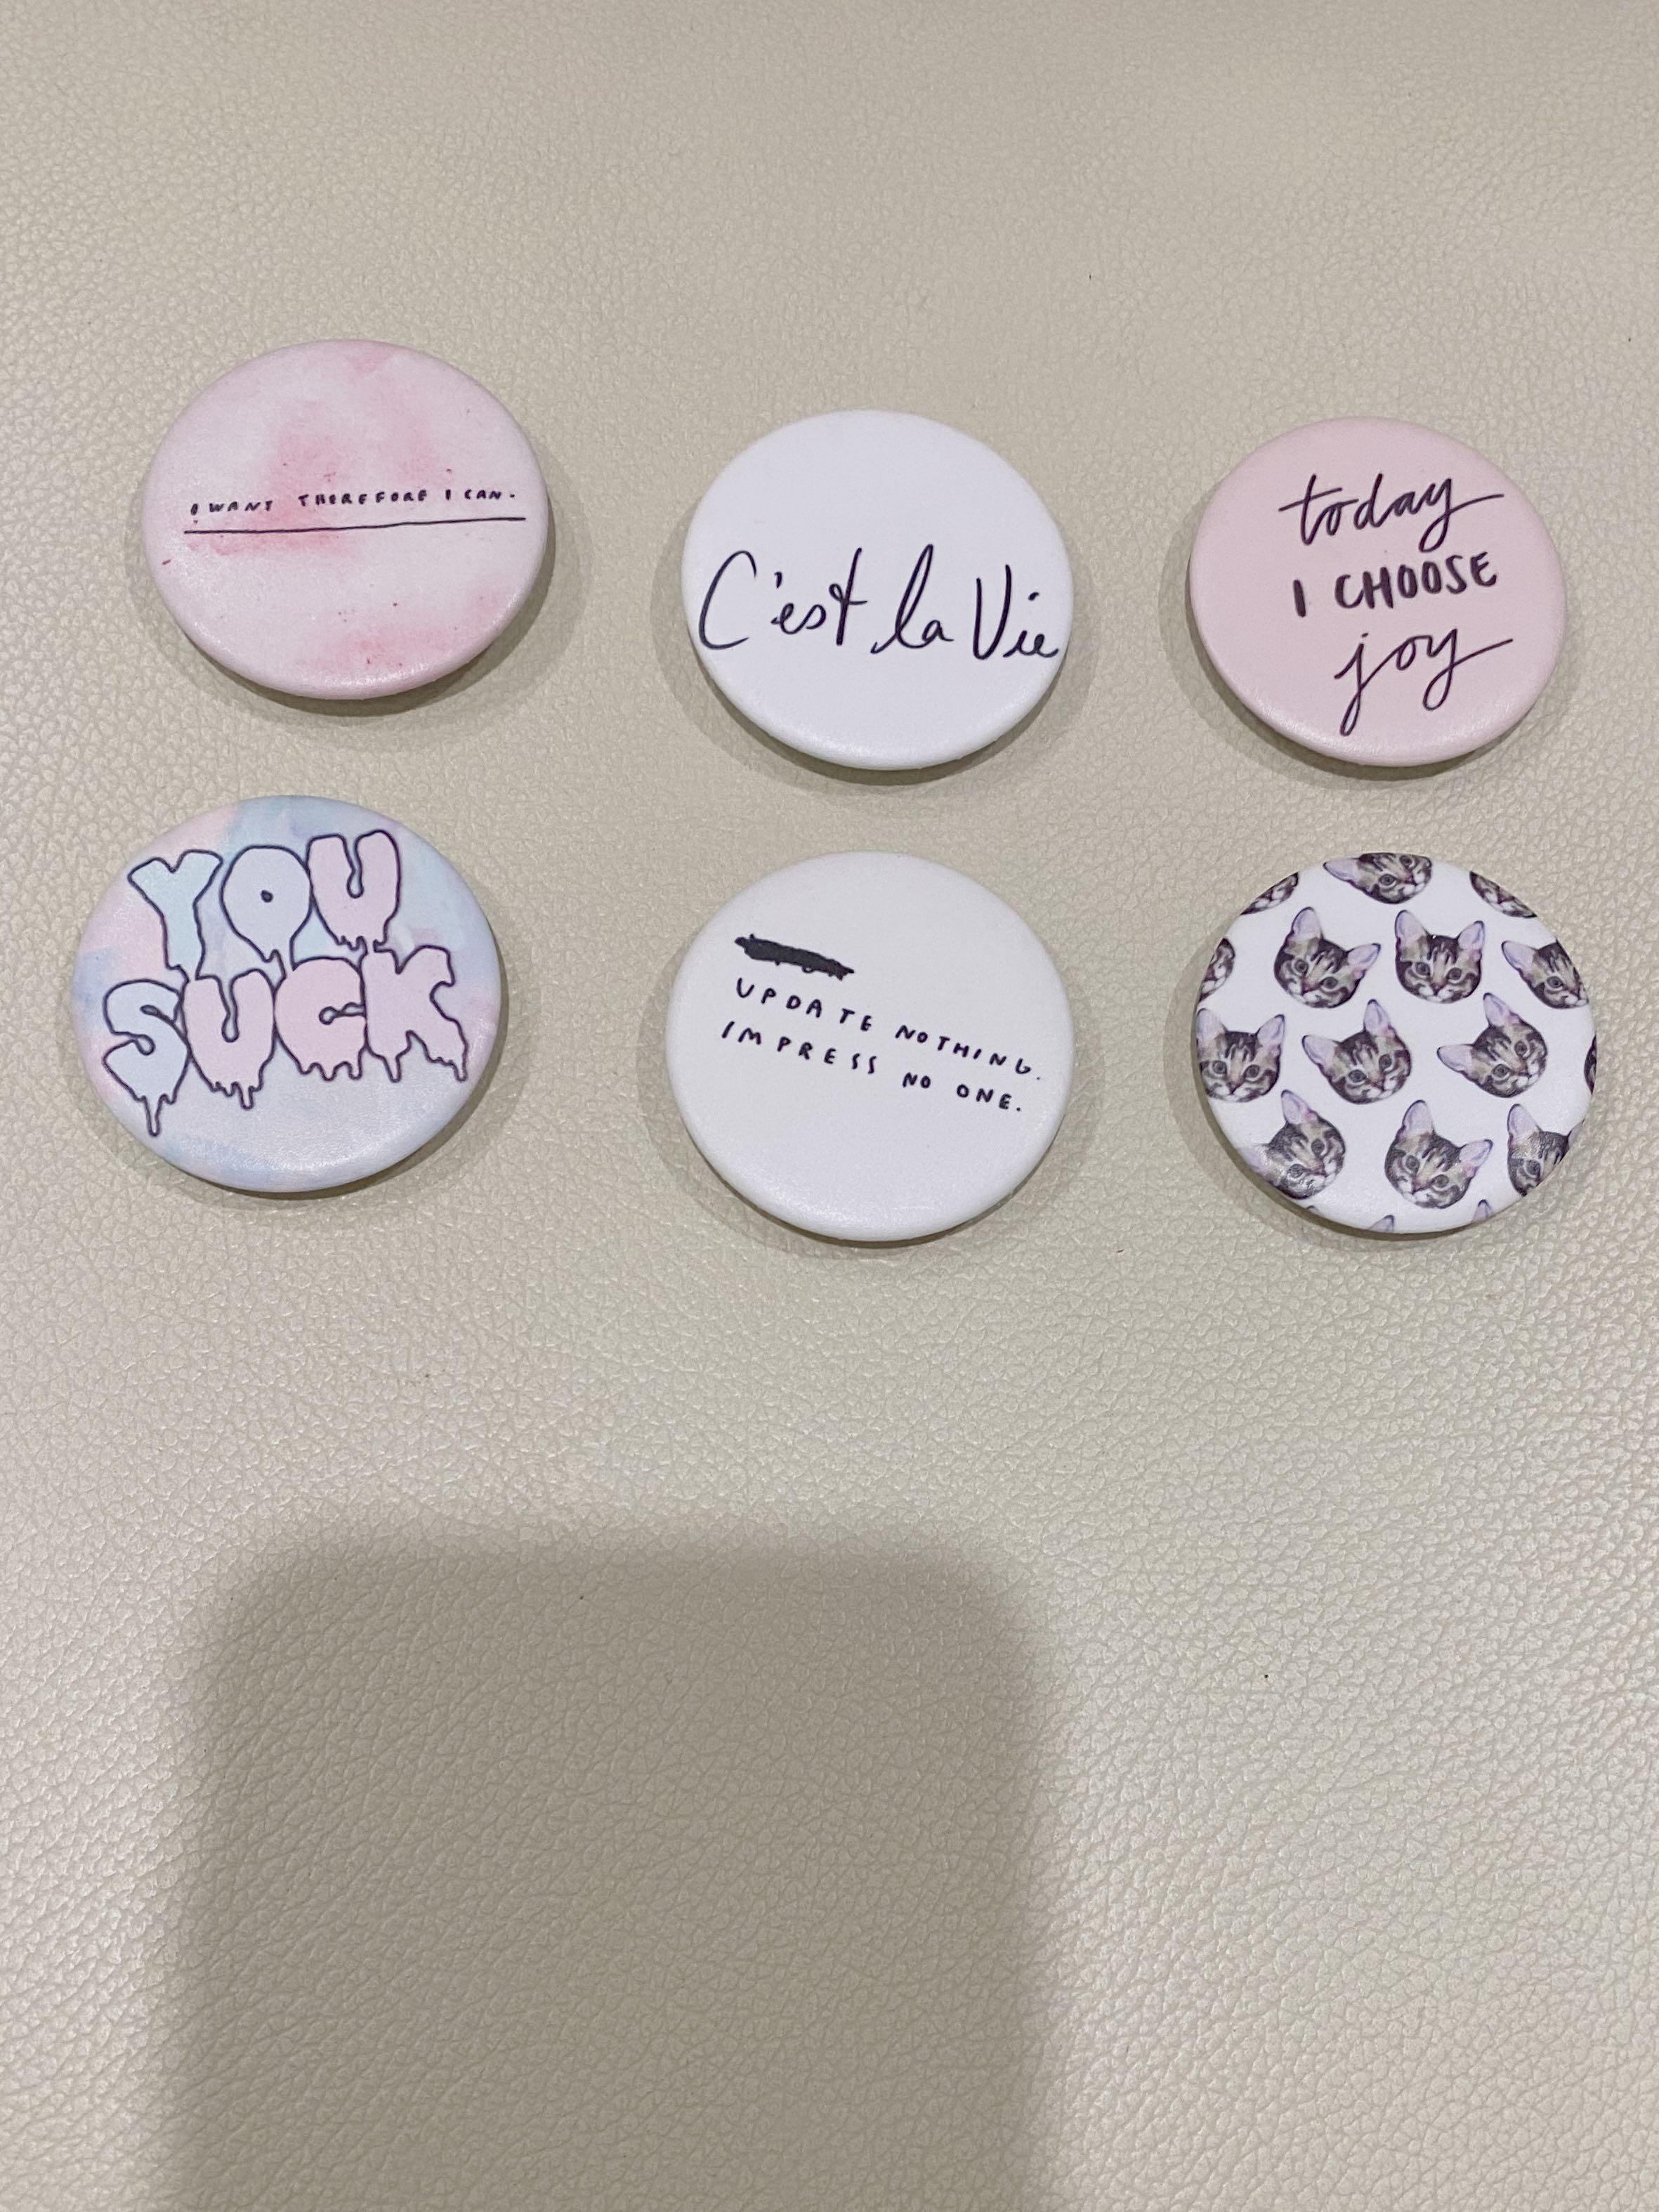 Aesthetic pins - pastel, pink, cats, words